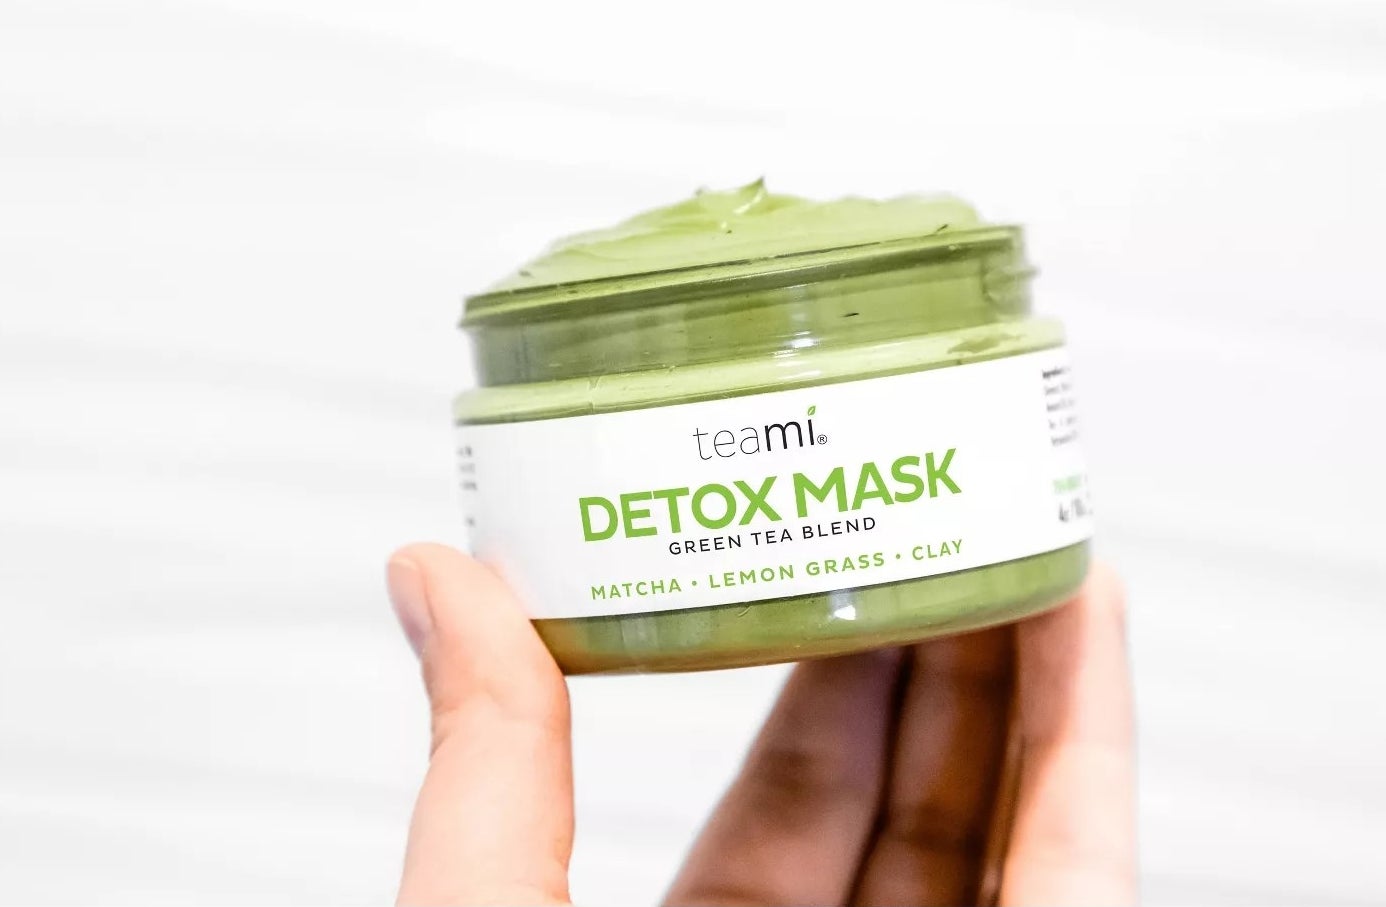 A model holding a jar filled with the detox mask